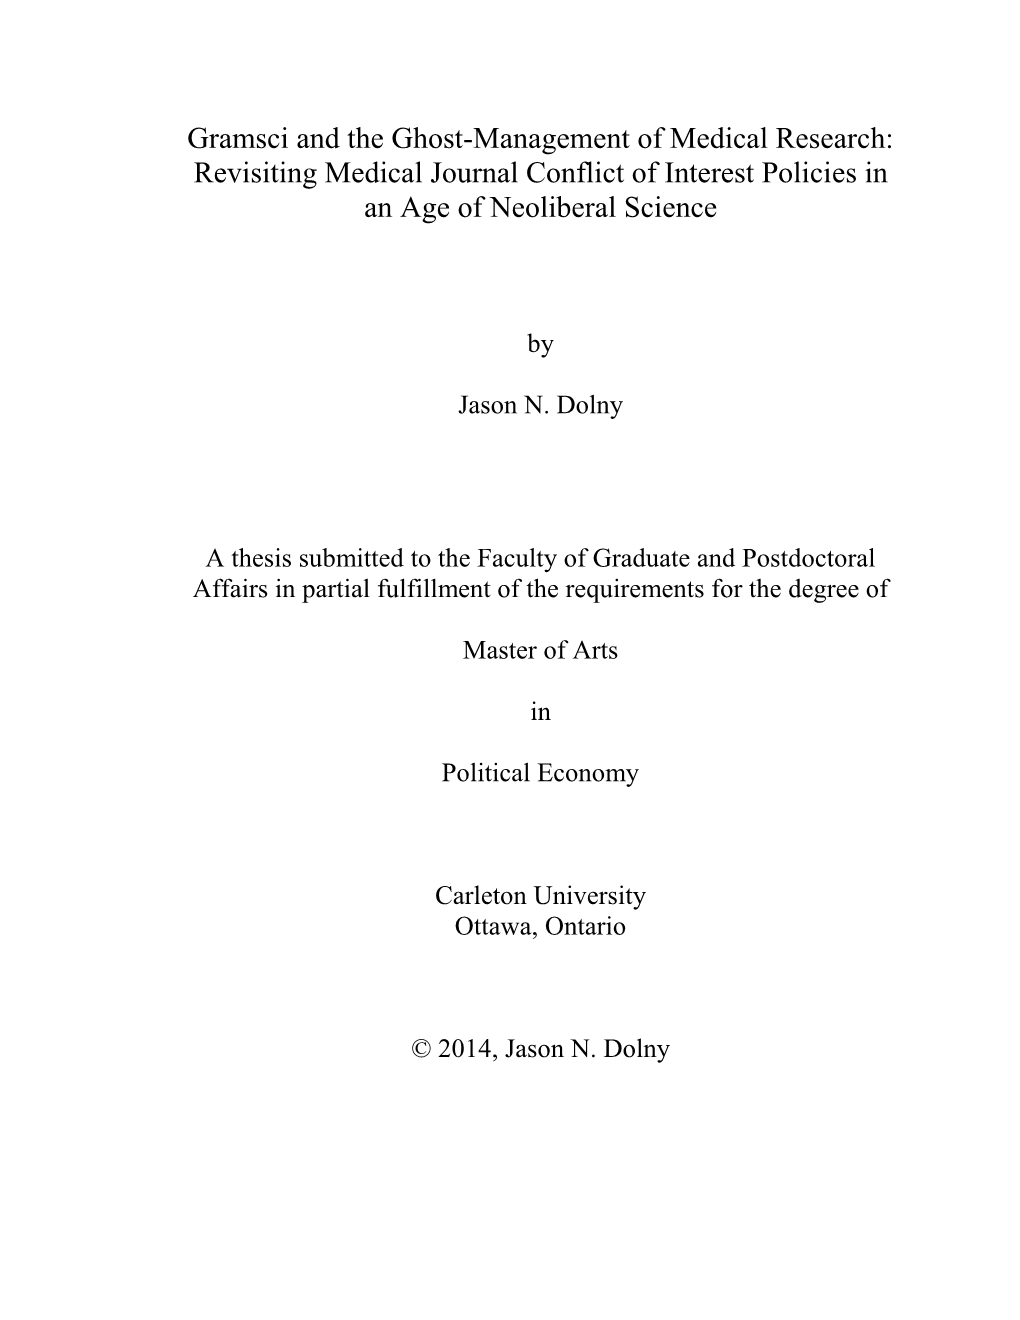 Gramsci and the Ghost-Management of Medical Research: Revisiting Medical Journal Conflict of Interest Policies in an Age of Neoliberal Science